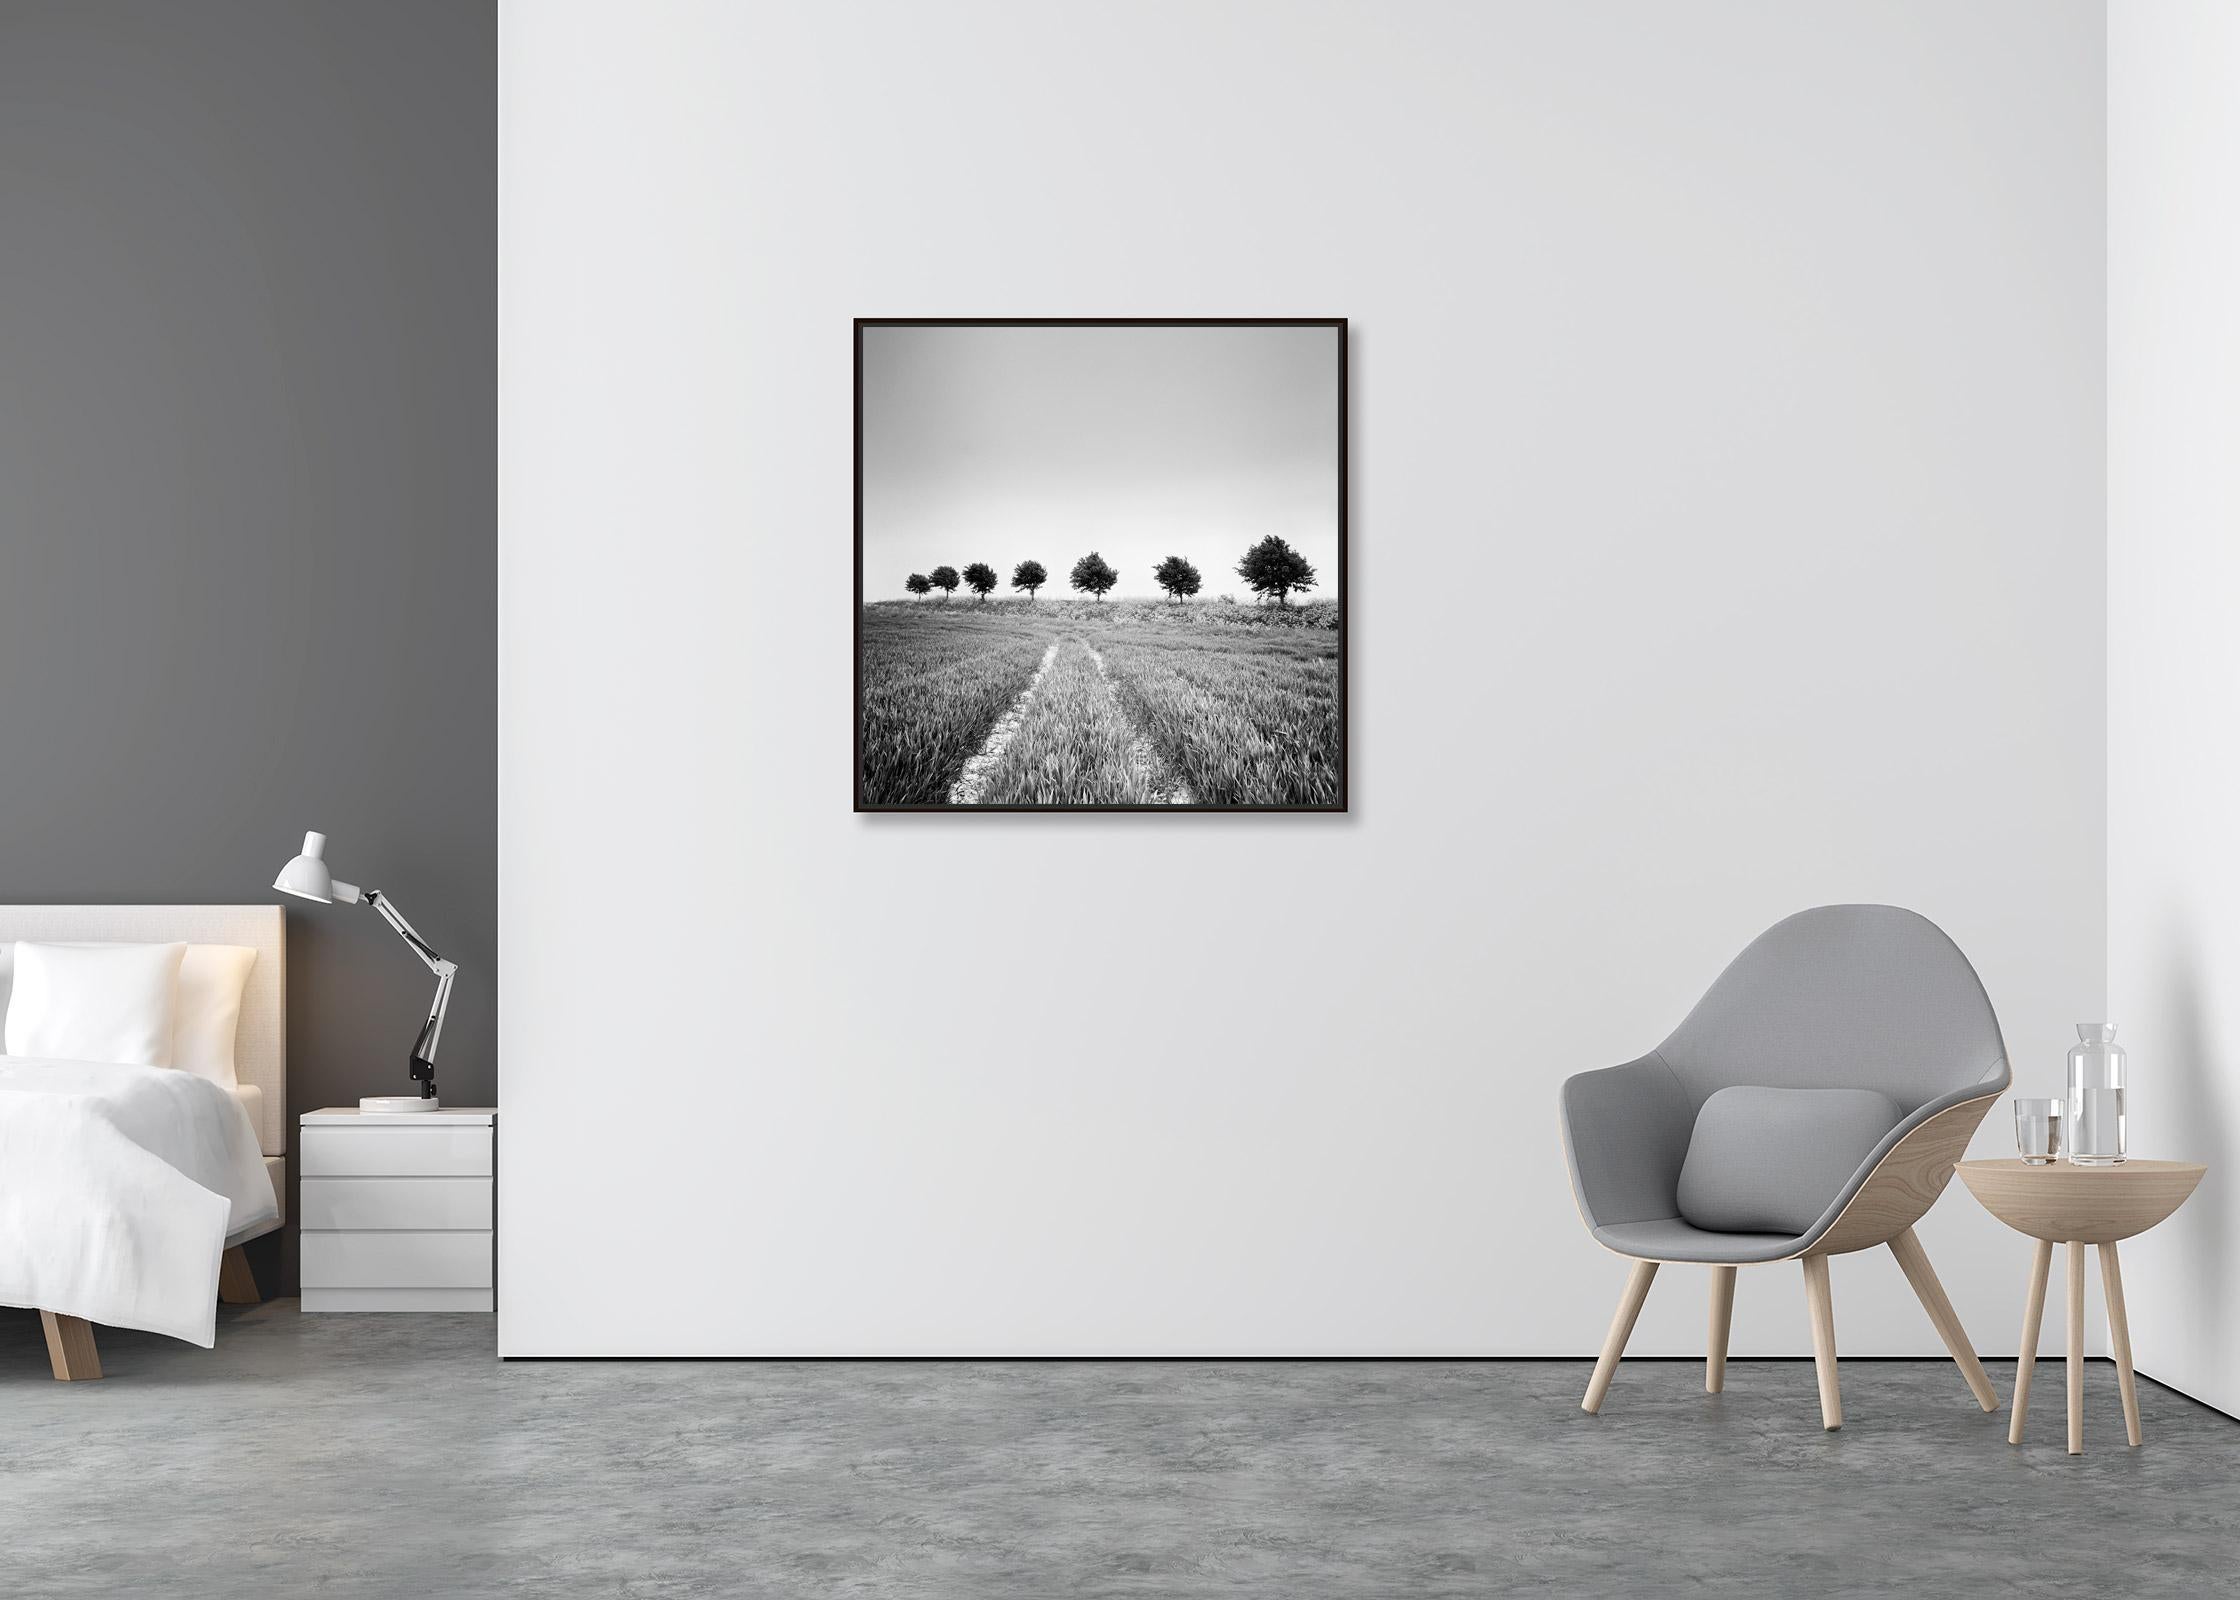 Wheat Field, Tree Avenue, Netherlands, black and white art landscape photography - Contemporary Photograph by Gerald Berghammer